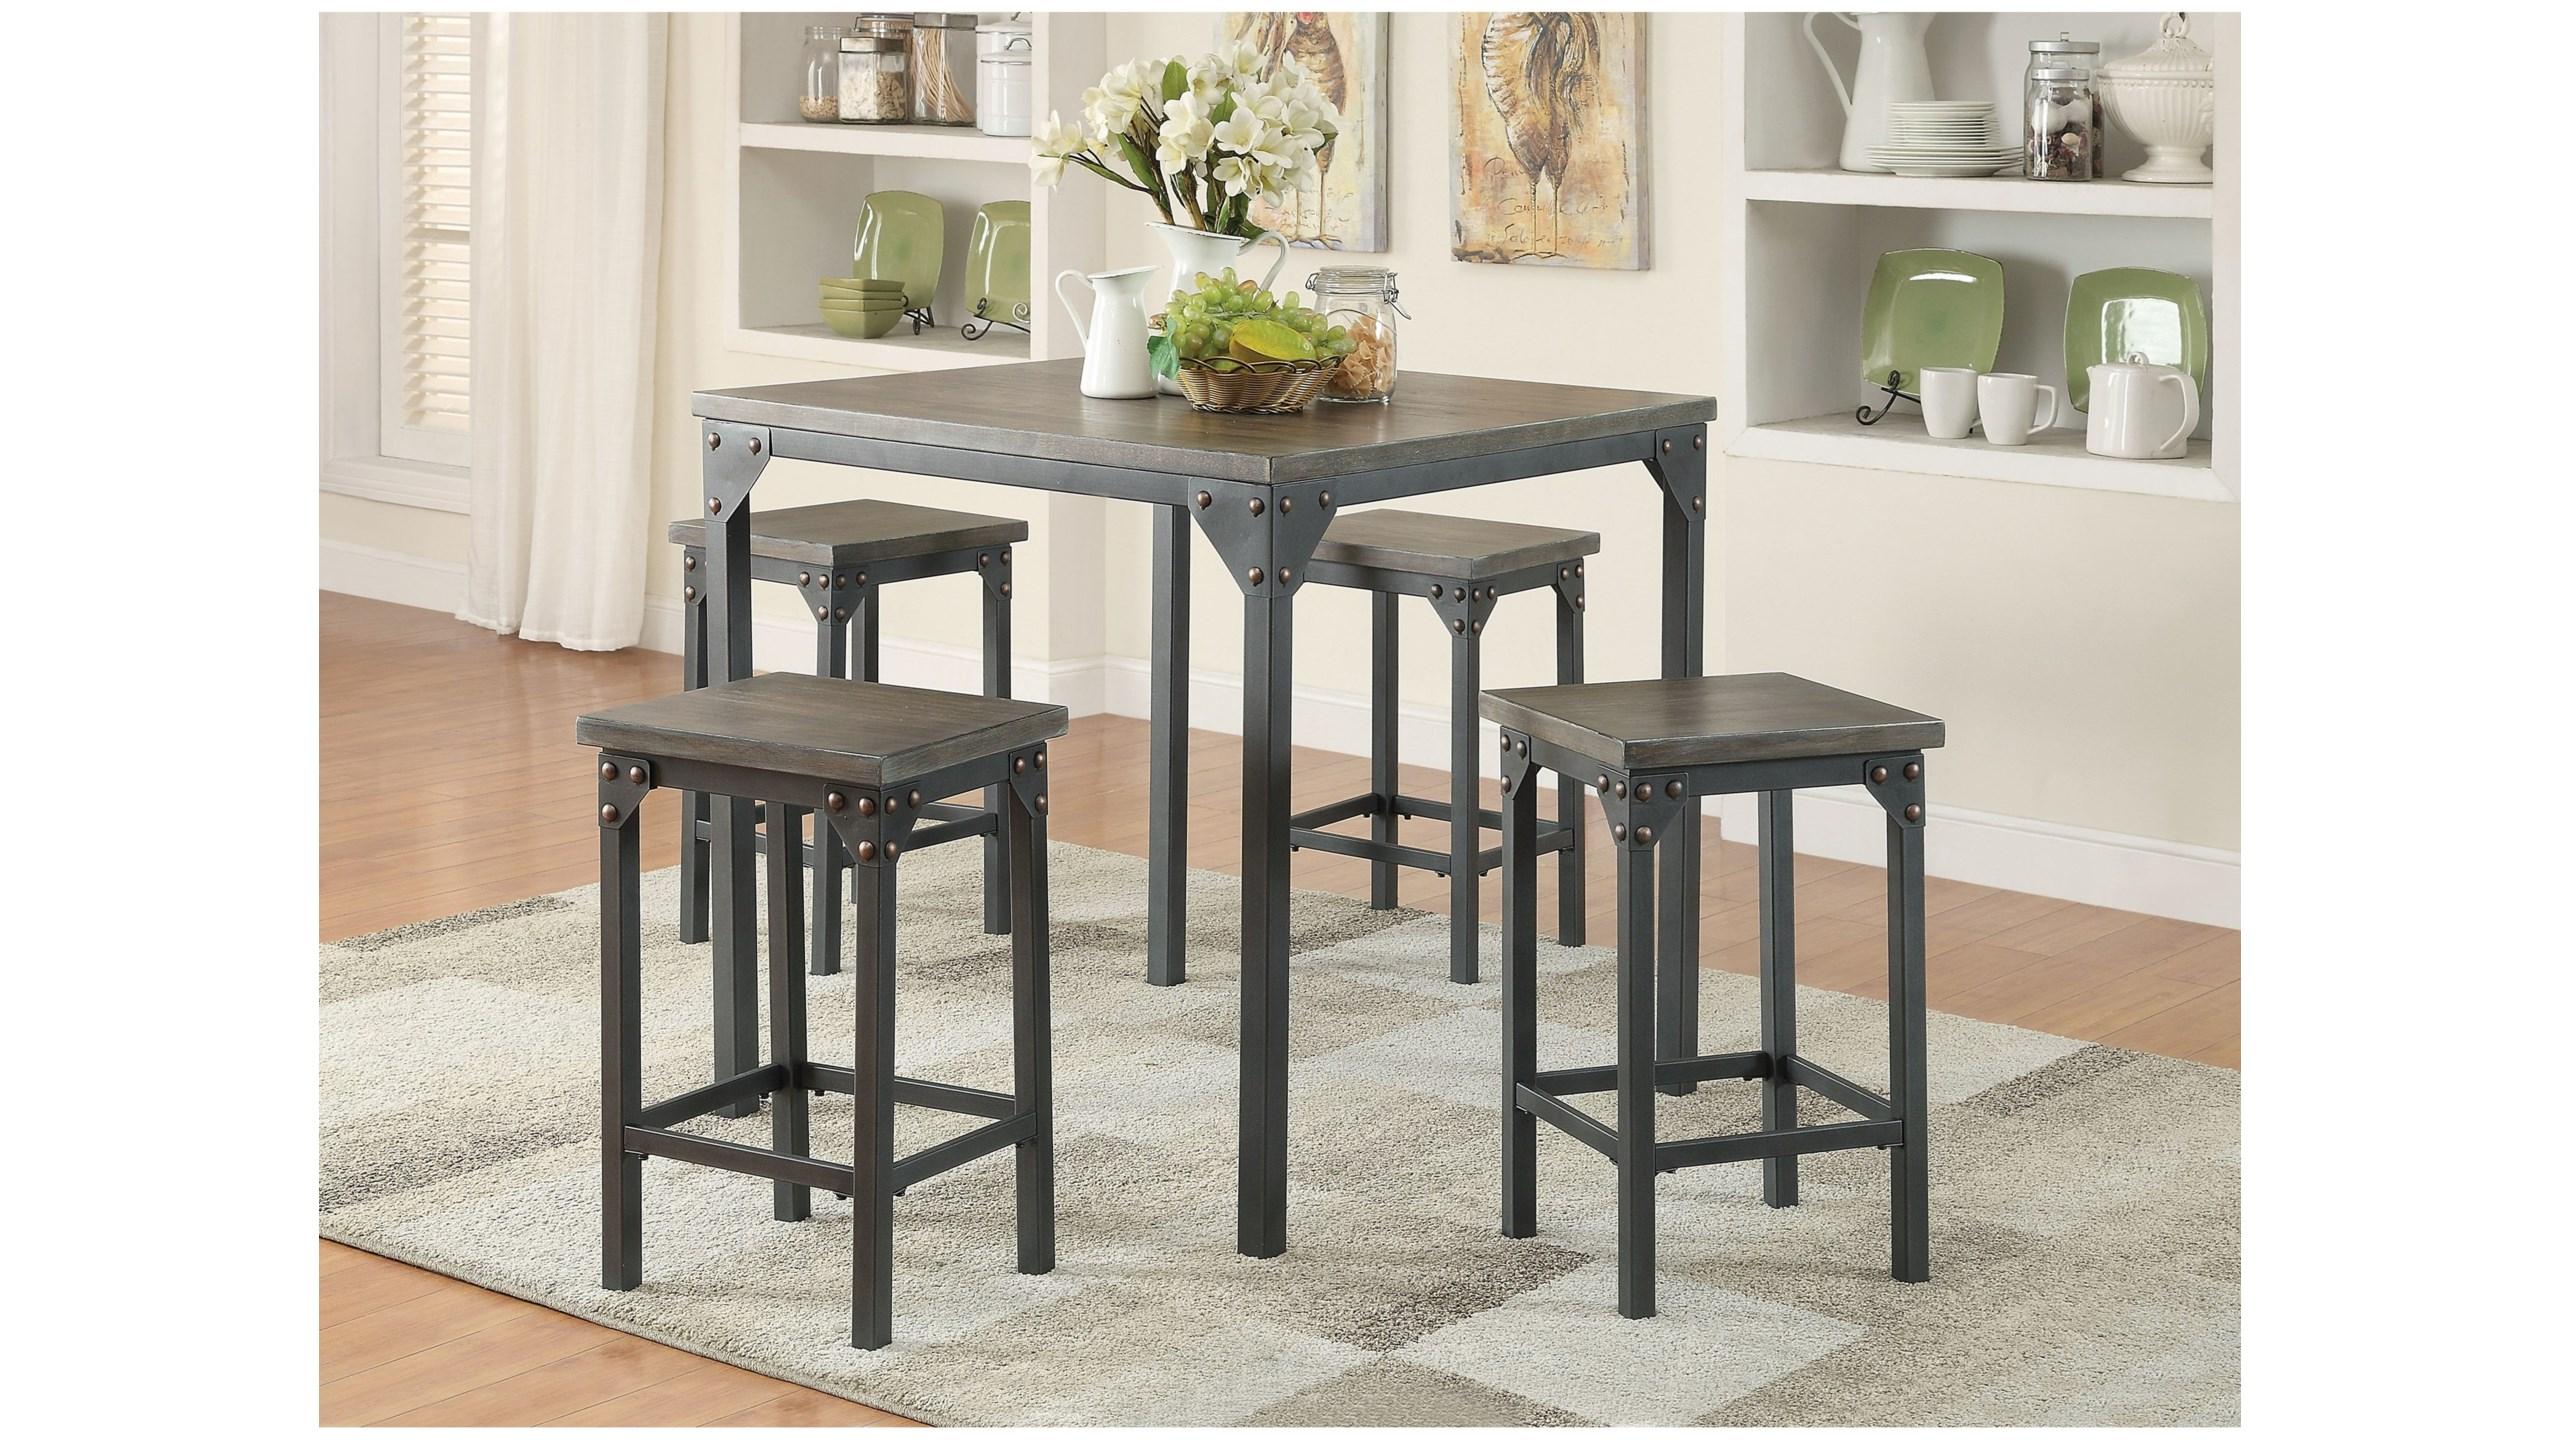 Rustic, Simple Counter Dining Set Percie 71645-5pcs in Gray 